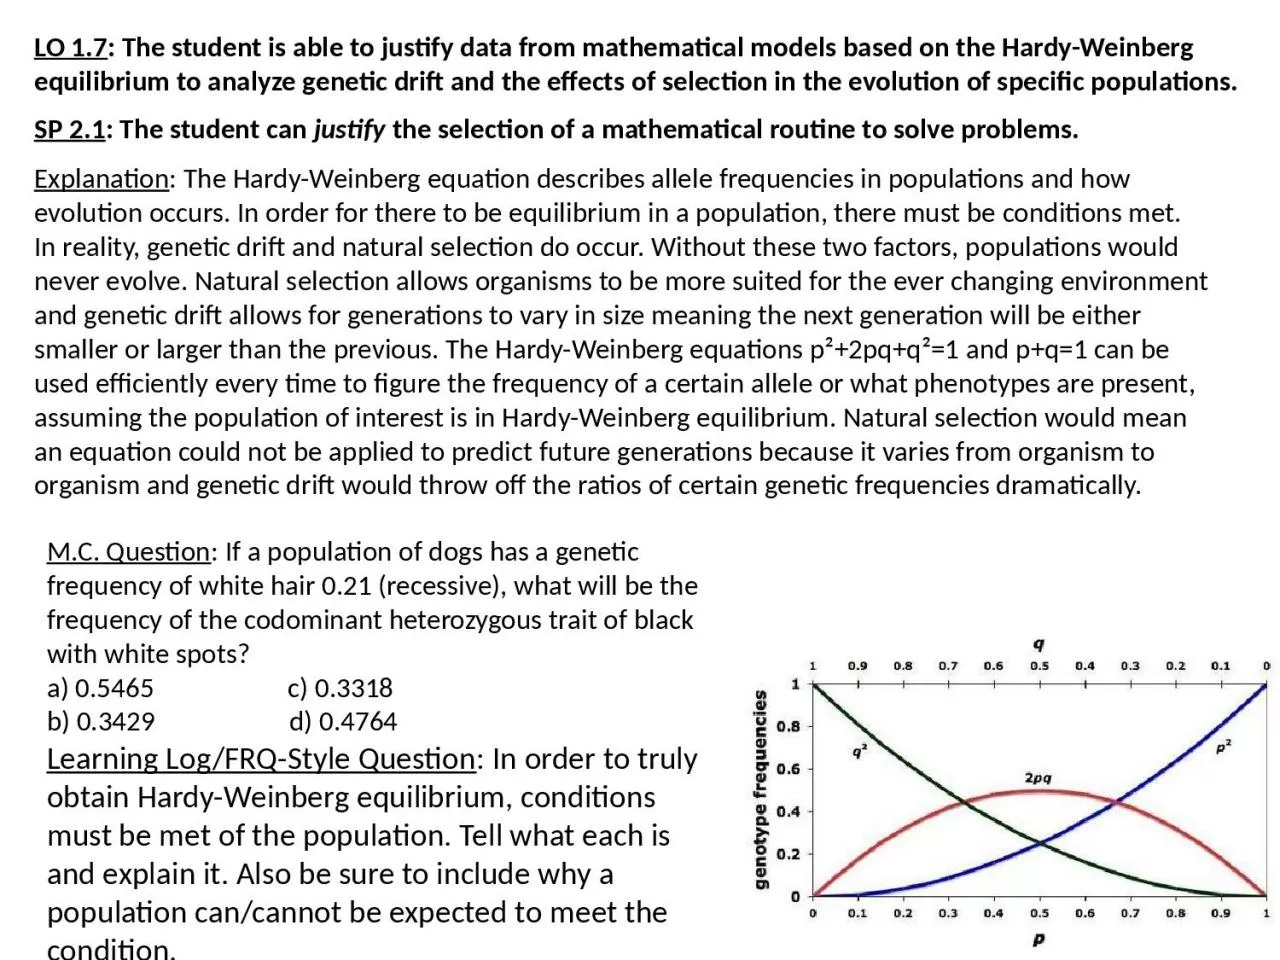 LO 1.7 : The student is able to justify data from mathematical models based on the Hardy-Weinberg